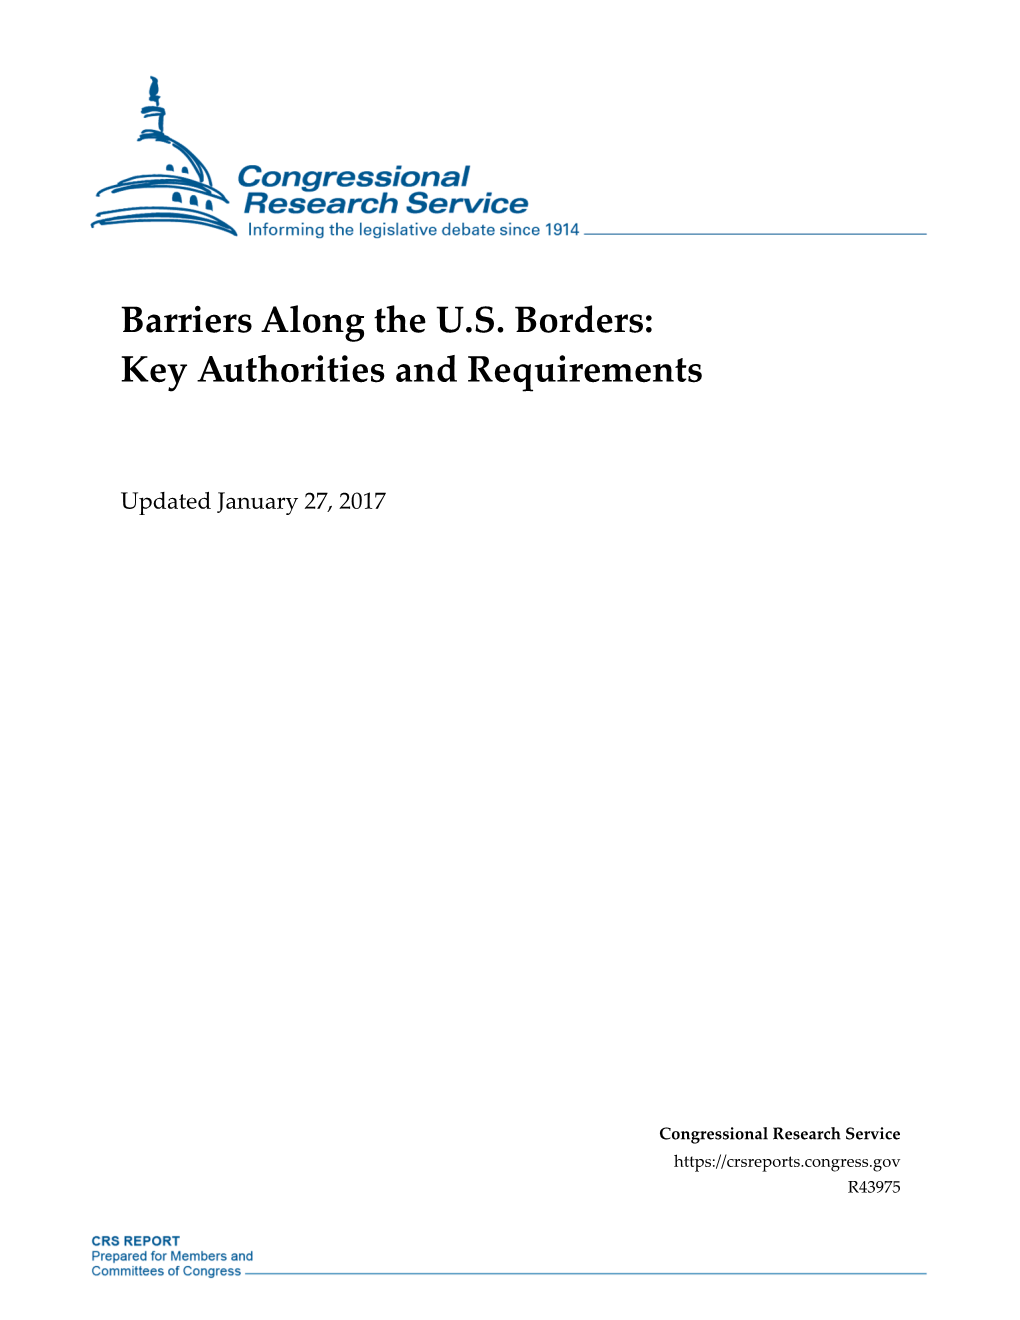 Barriers Along the U.S. Borders: Key Authorities and Requirements